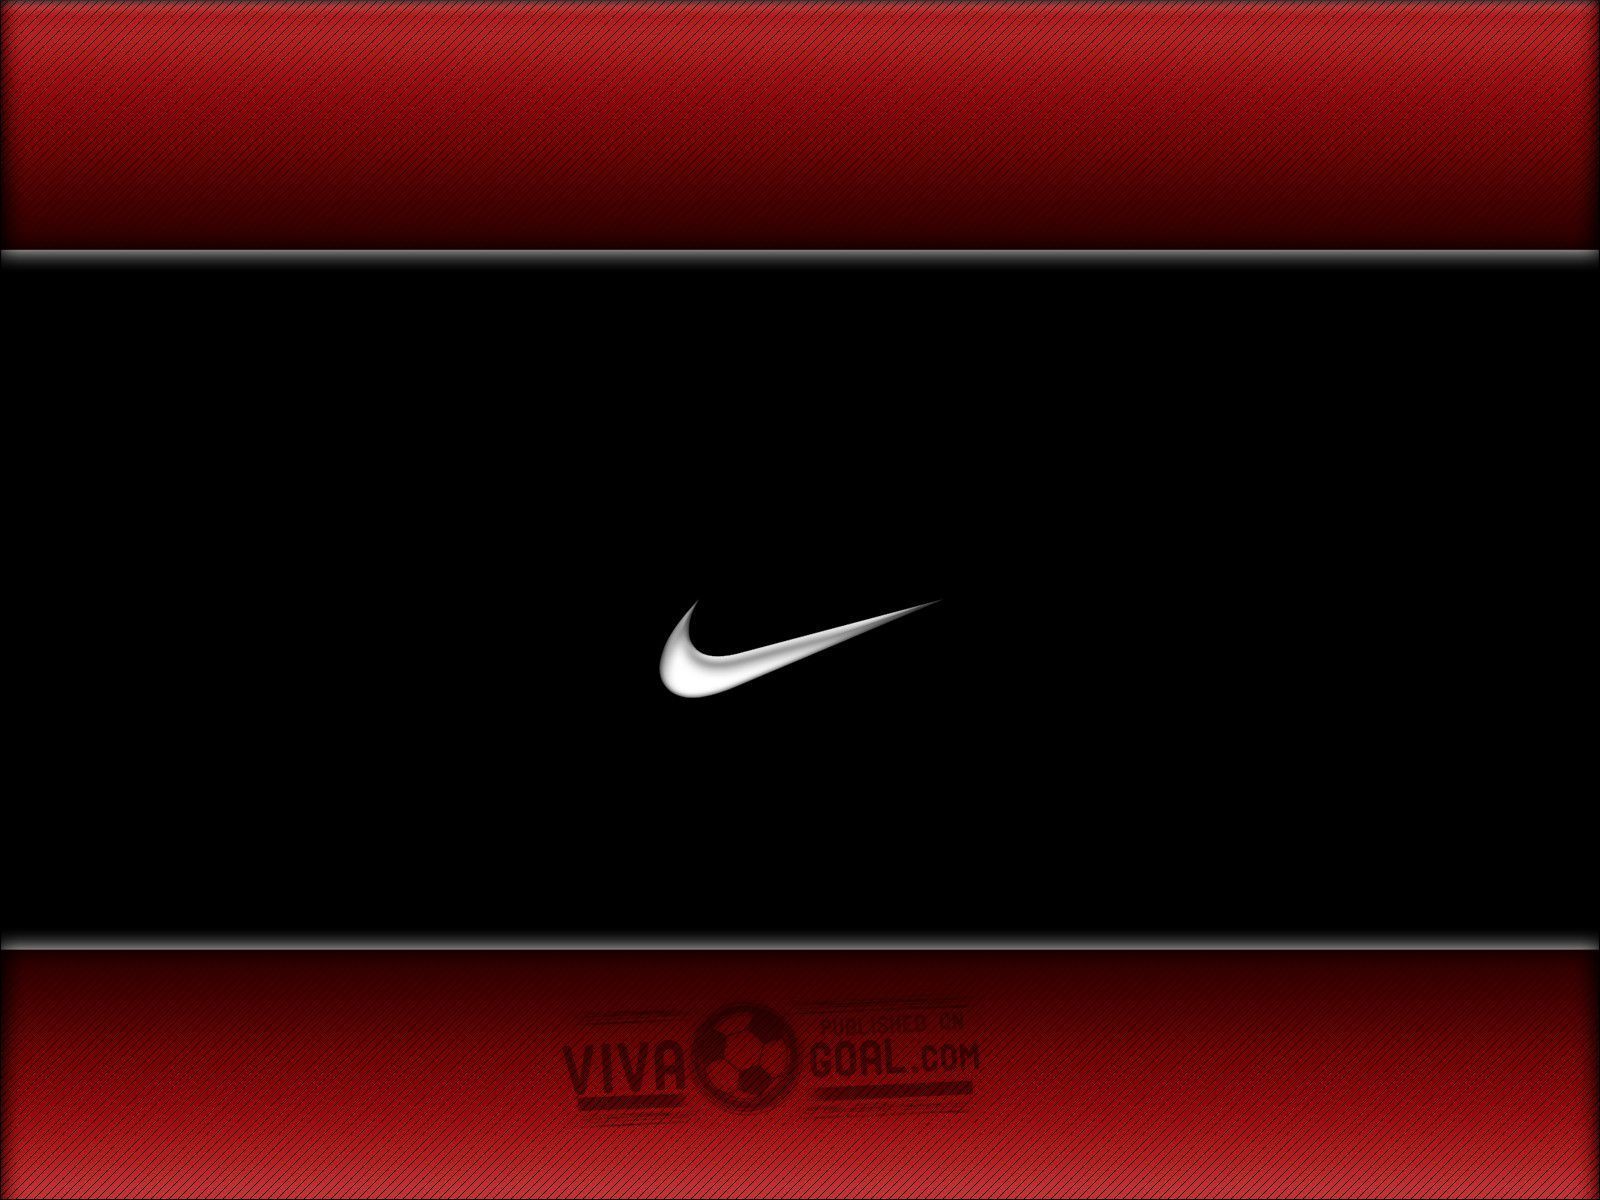 New Nike Wallpapers - Wallpaper Cave